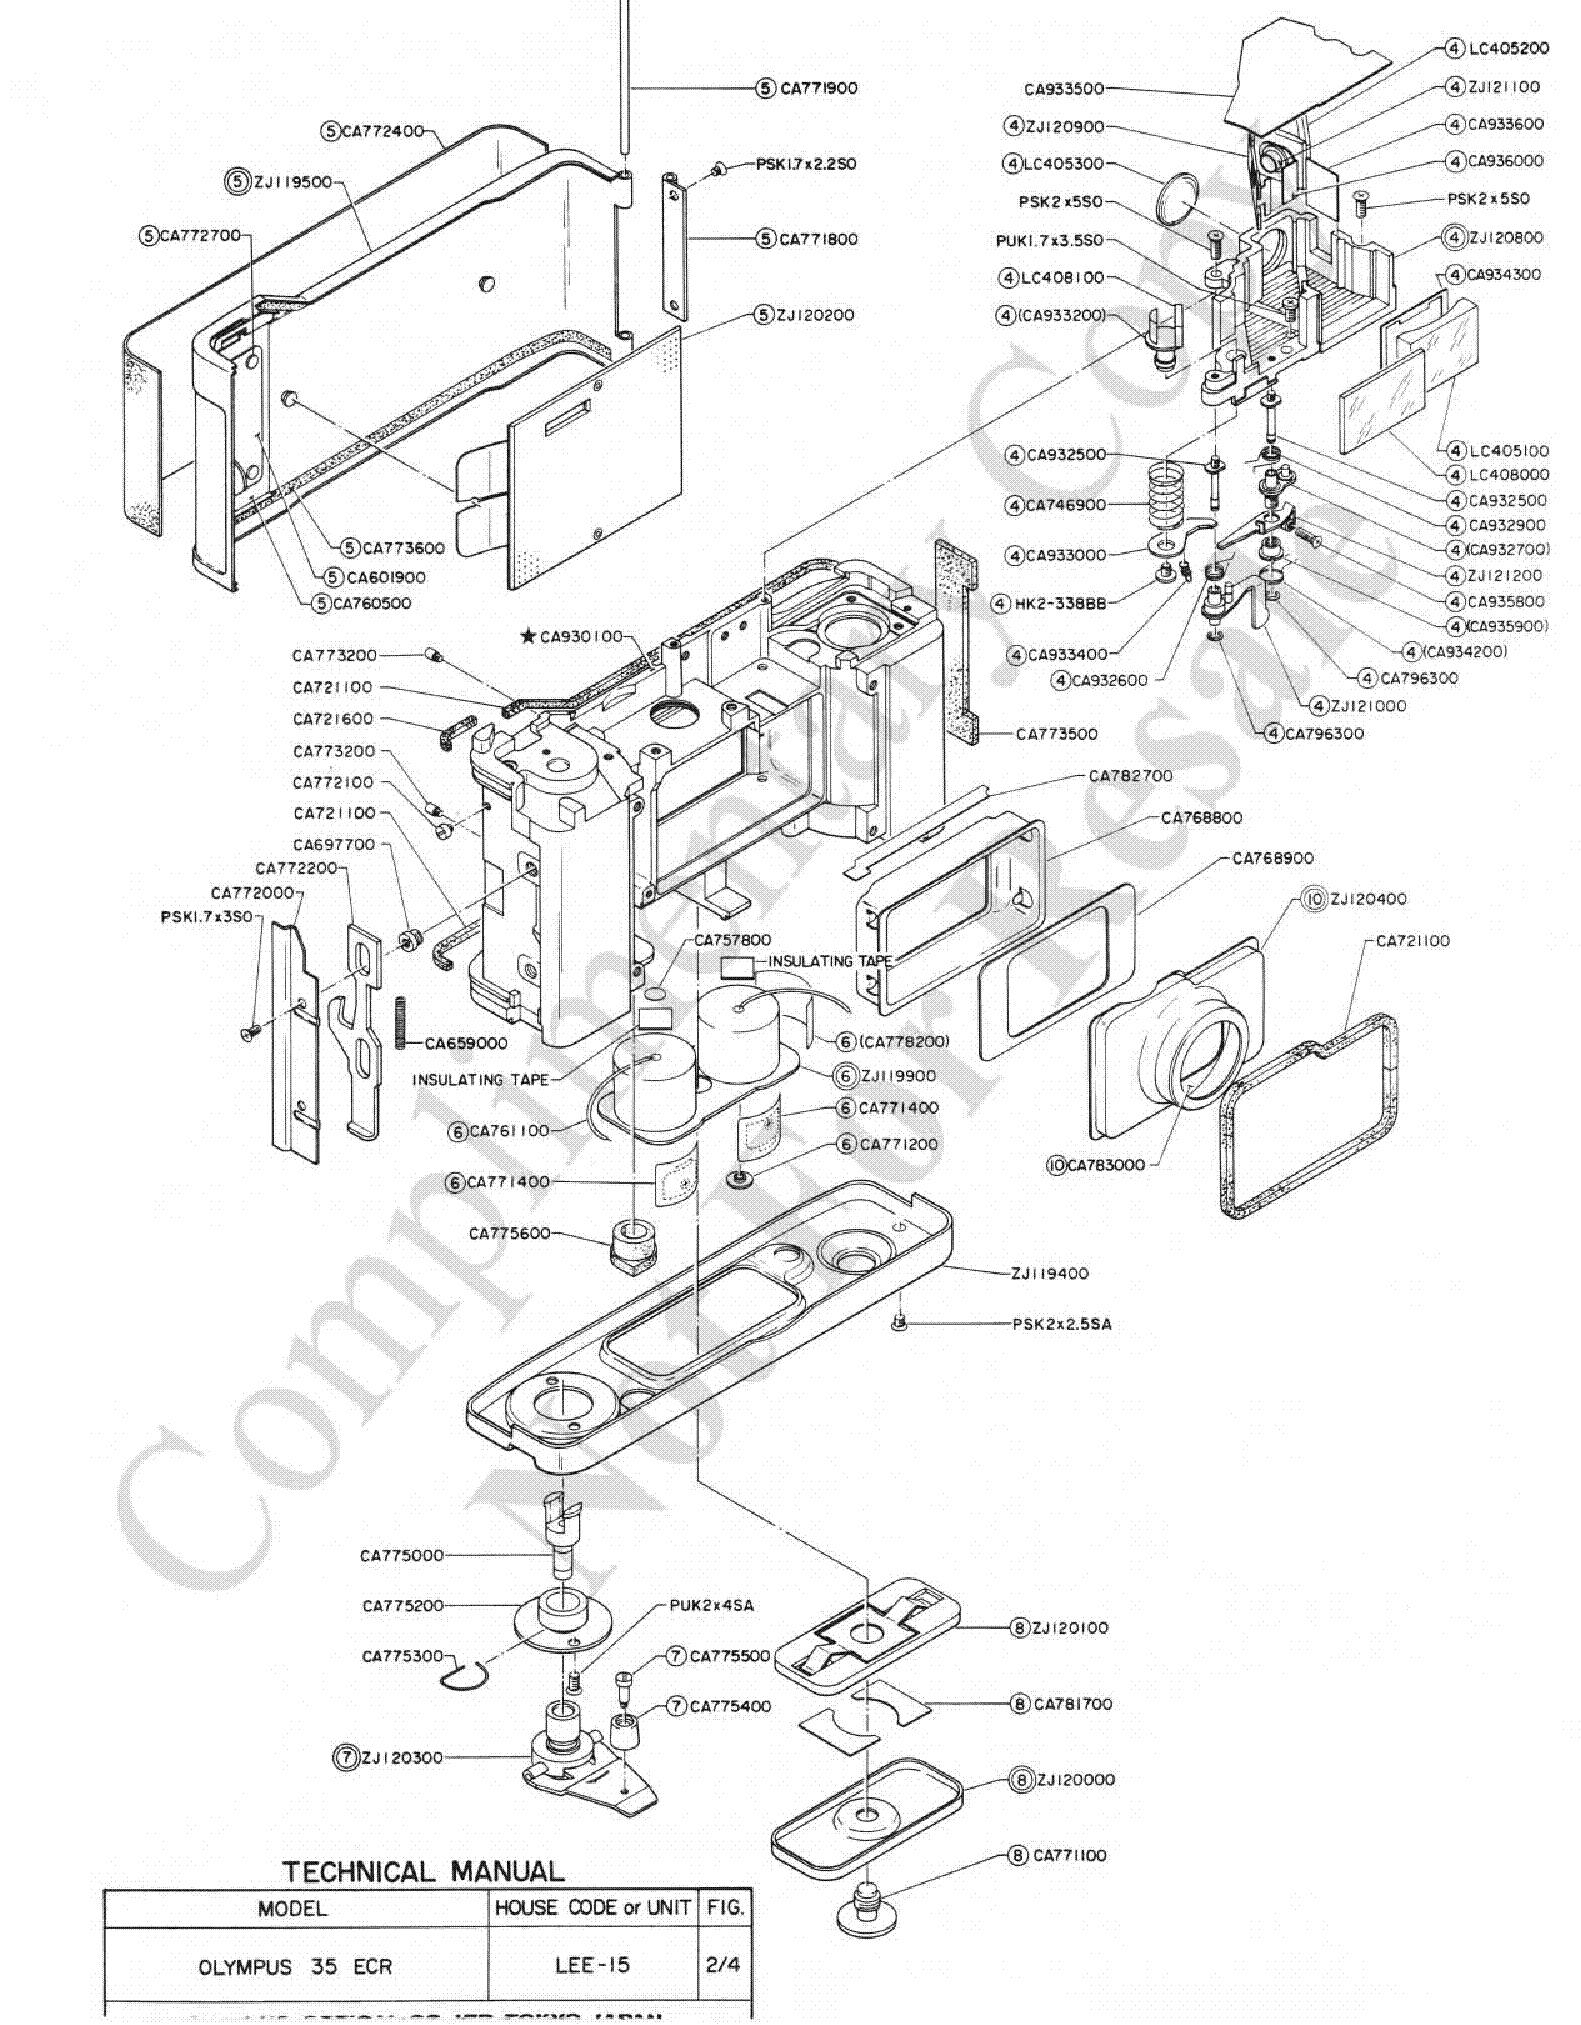 Olympus 35ecr Exploded Parts Diagram Service Manual